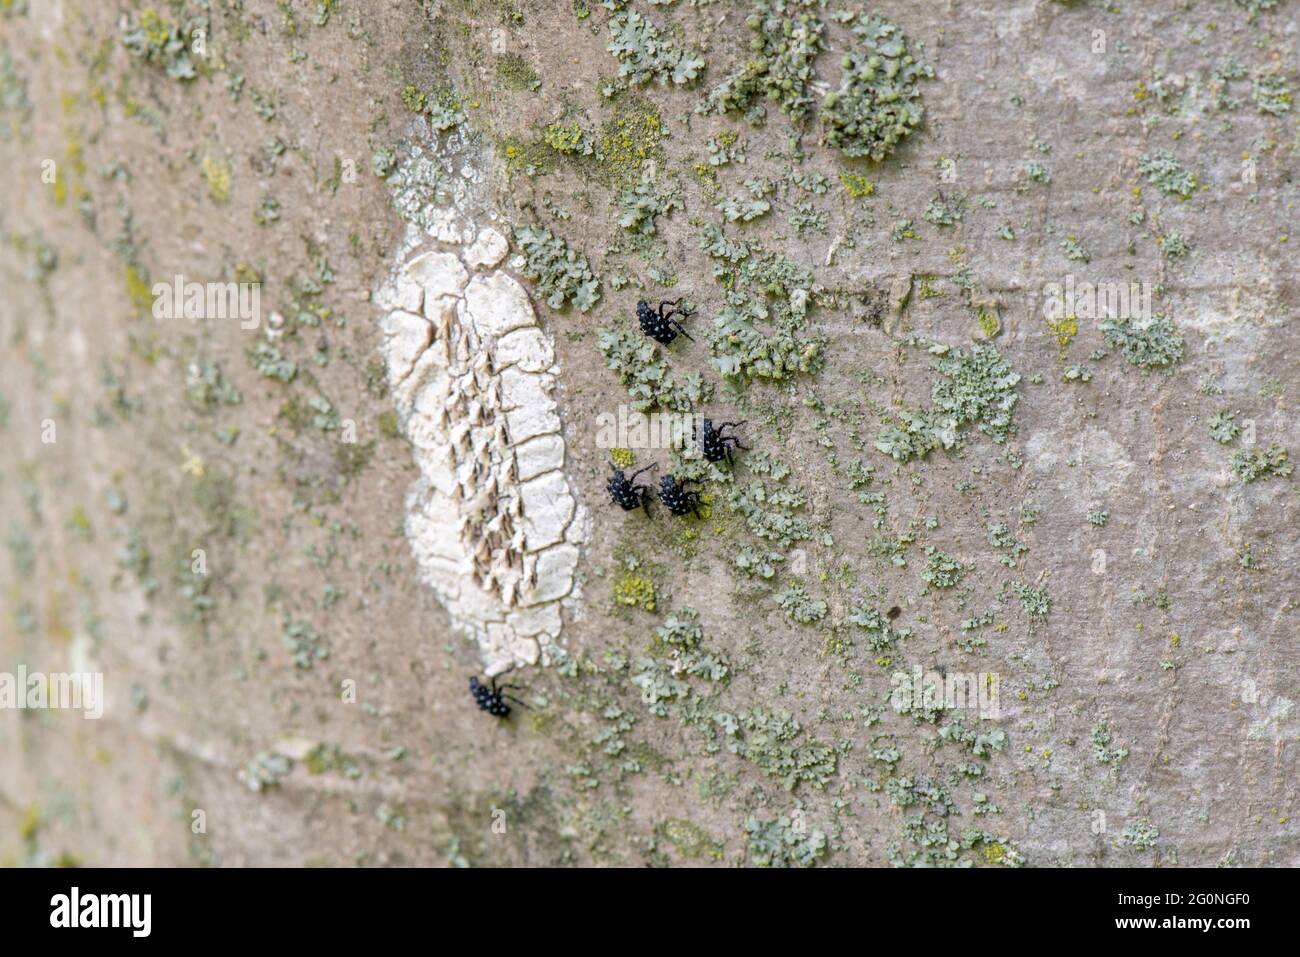 SPOTTED LANTERNFLY (LYCORMA DELICATULA) NYMPHS JUST HATCHED FROM EGG MASS IN LATE SPRING, PENNSYLVANIA Stock Photo